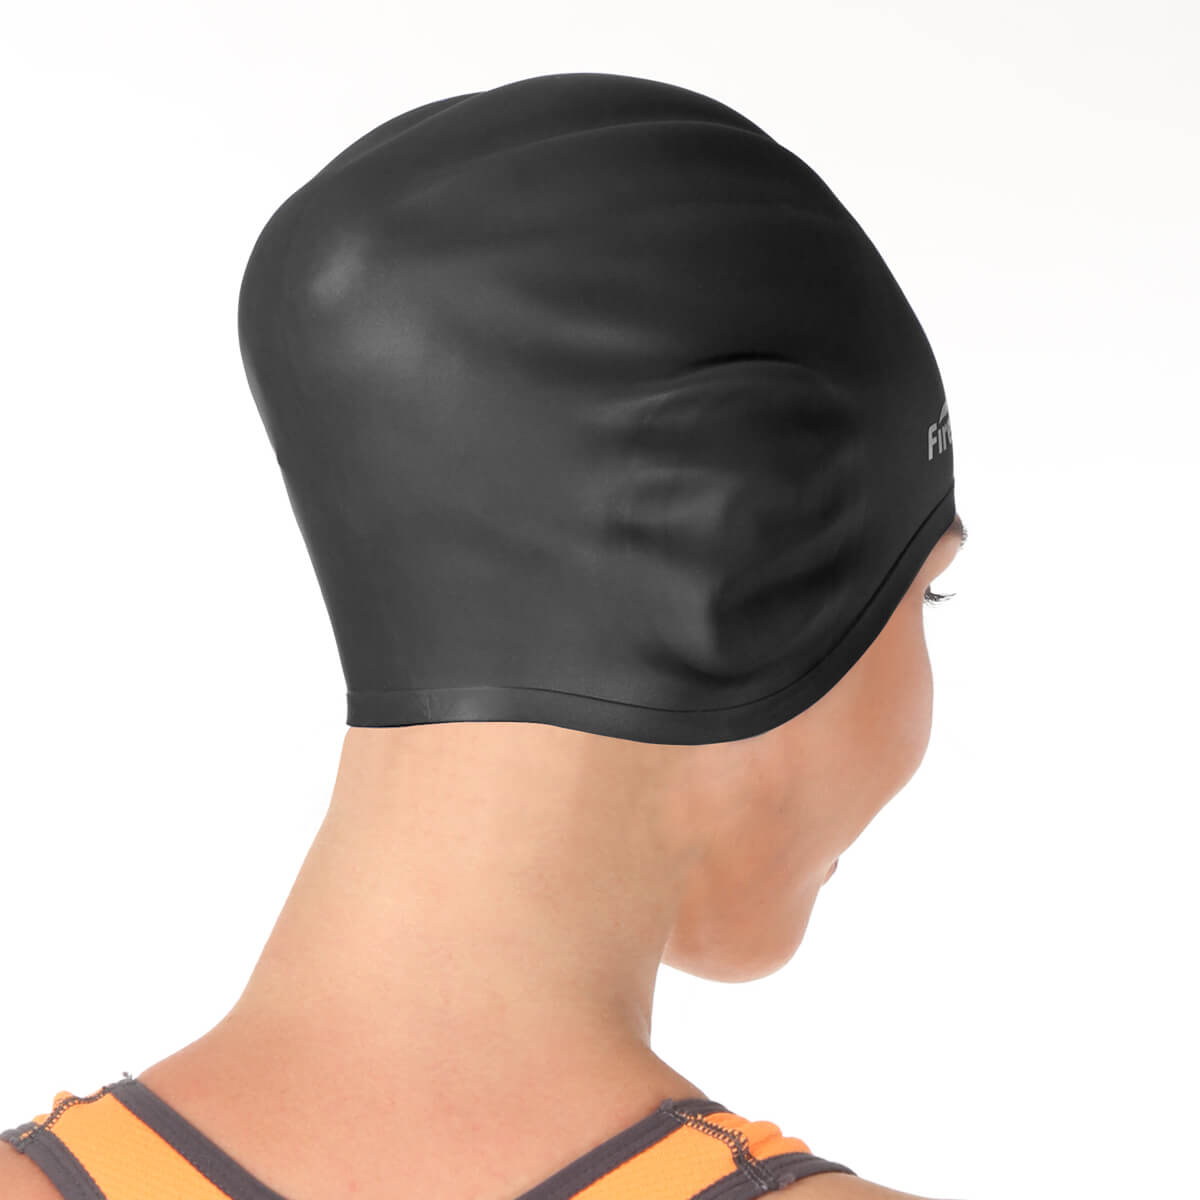 Silicone Swimming Caps Keep Hair Dry | For Men Women Kids ...